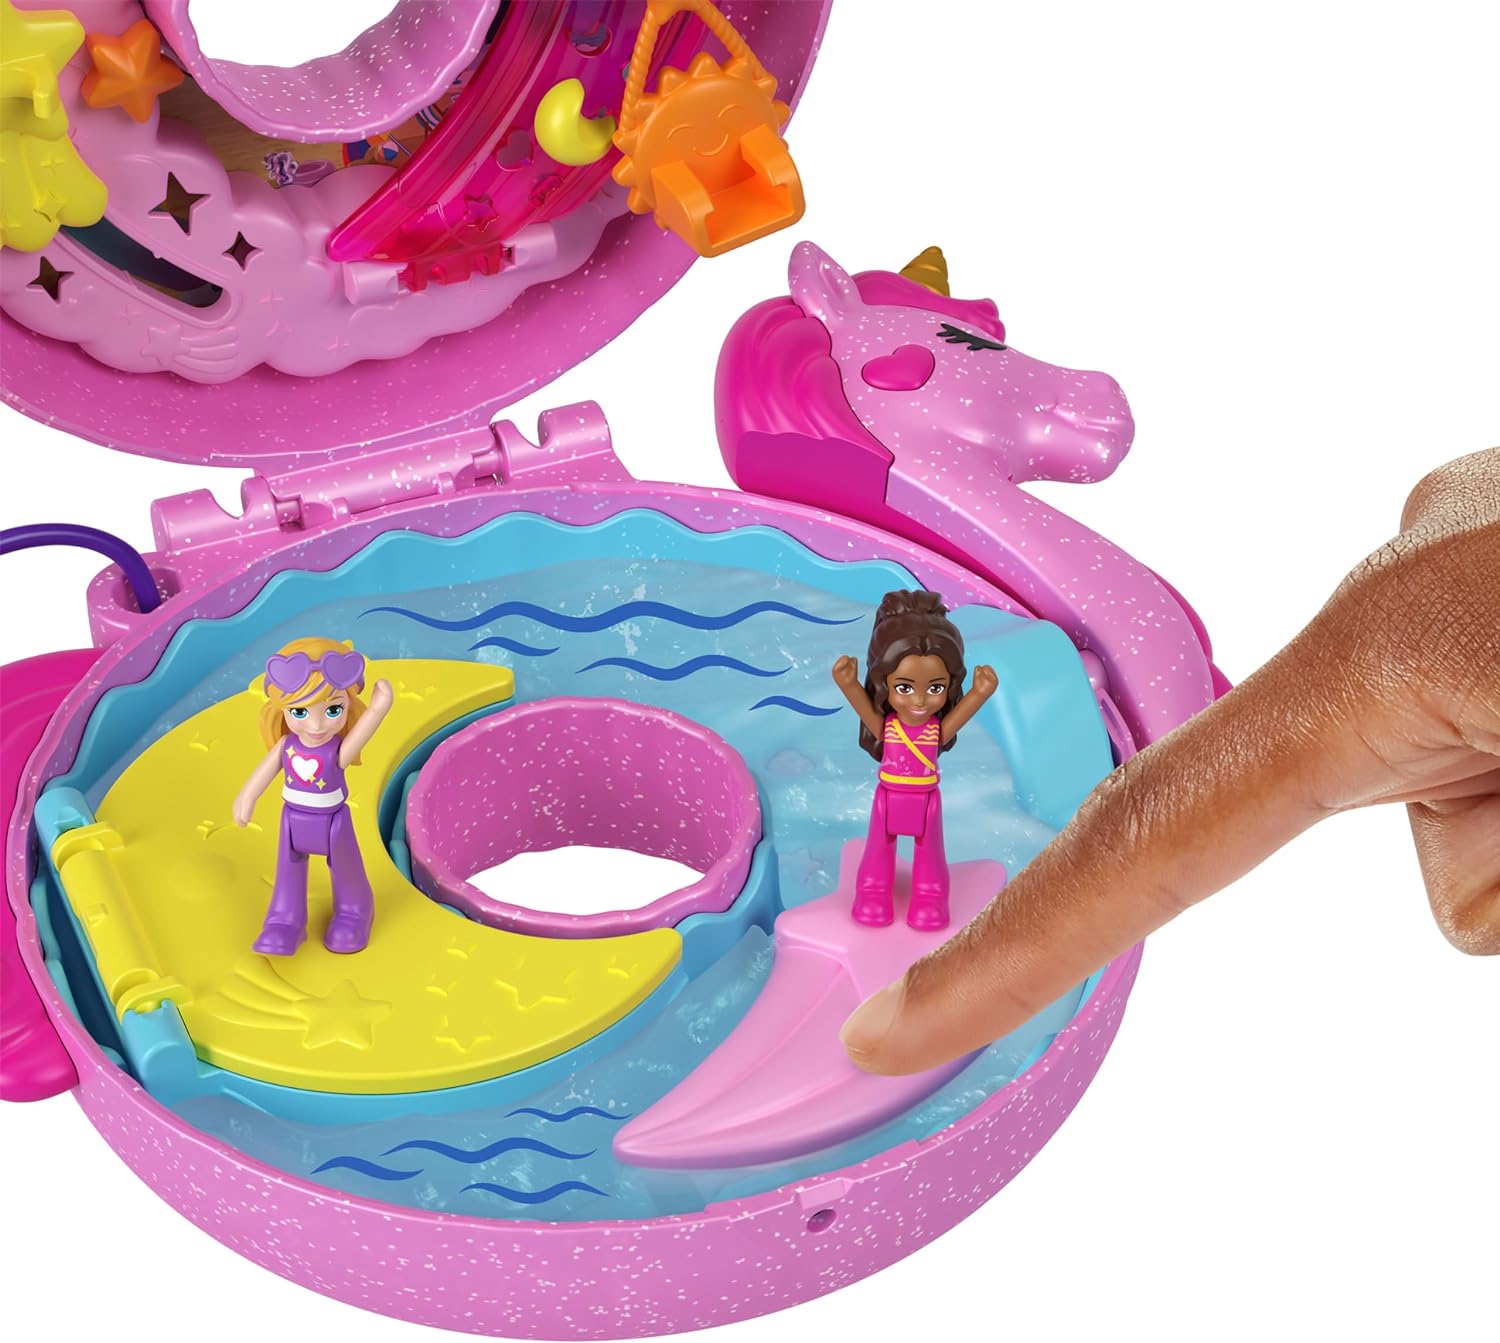 Polly Pocket Mini Middle School Compact with Dolls & Accessories 